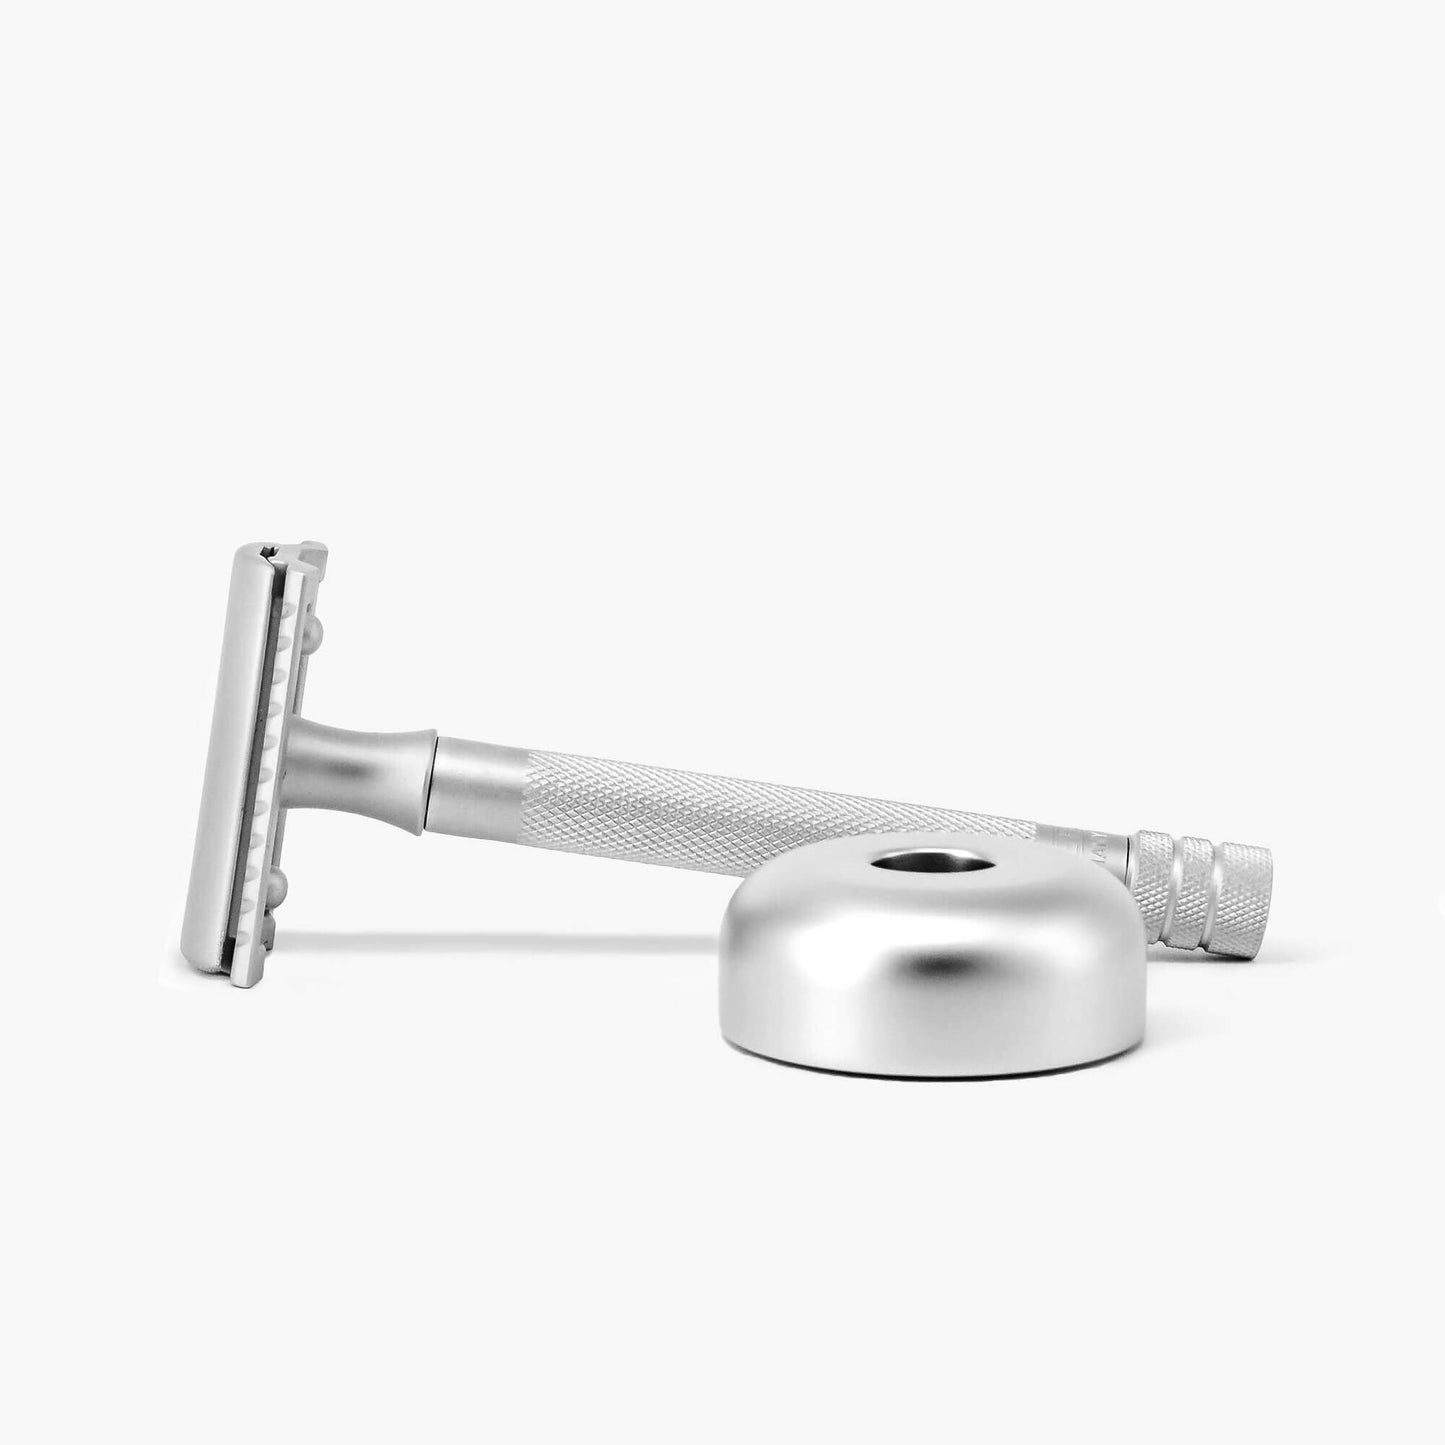 Merkur 22C Long Handled DE Safety Razor With Stand